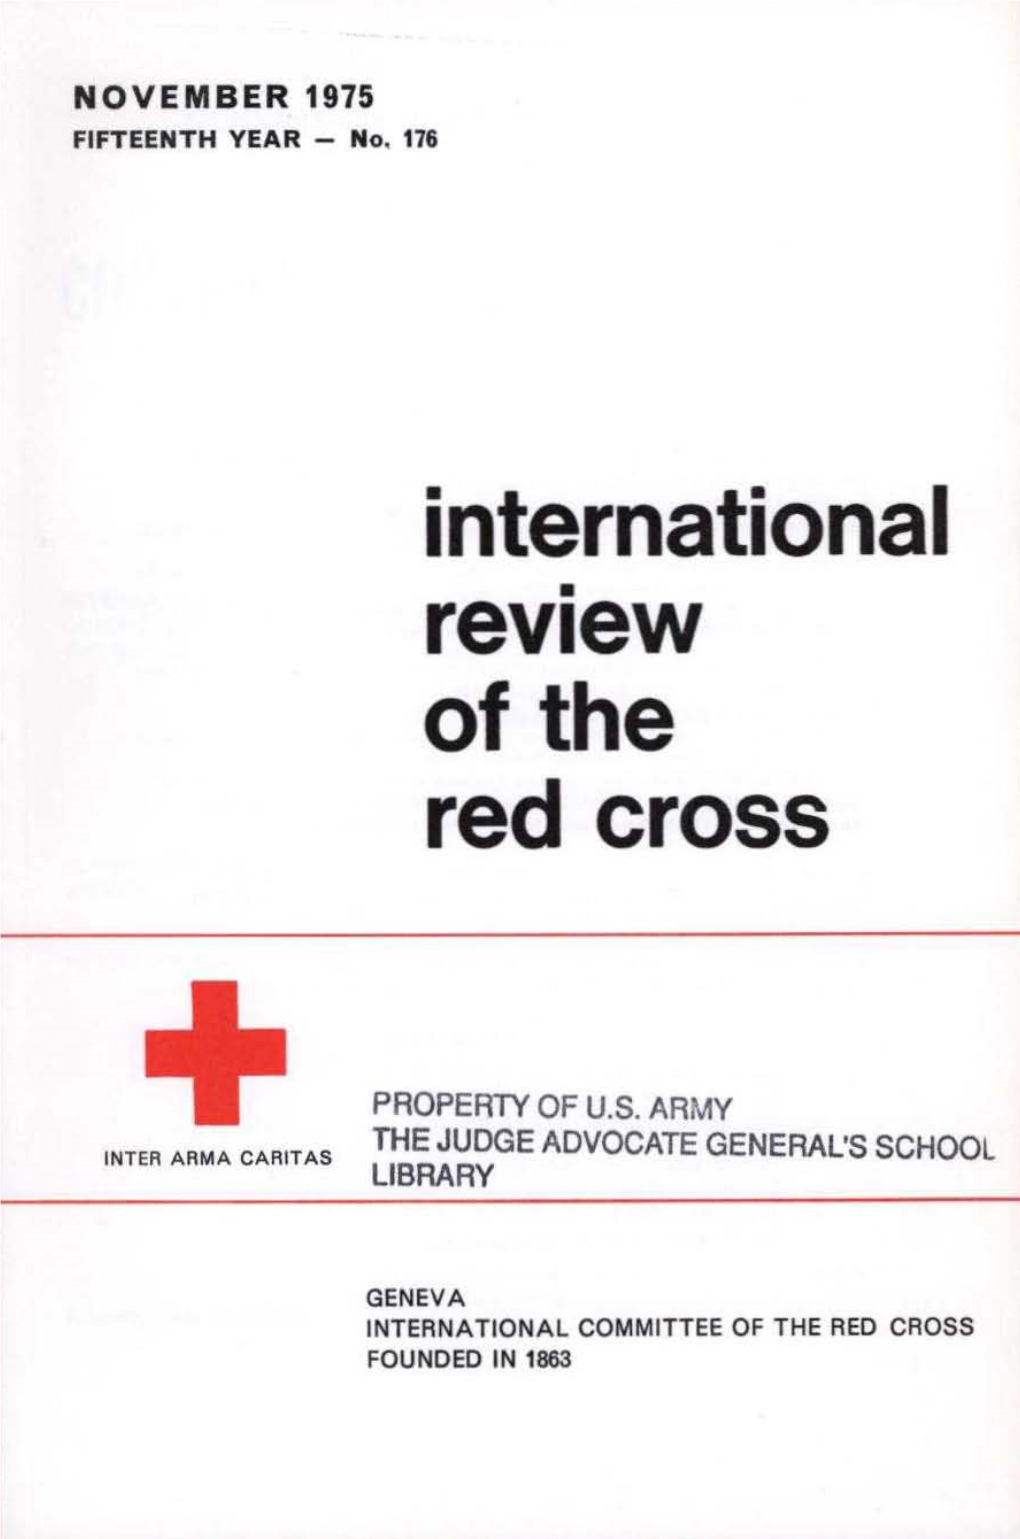 International Review of the Red Cross, November 1975, Fifteenth Year